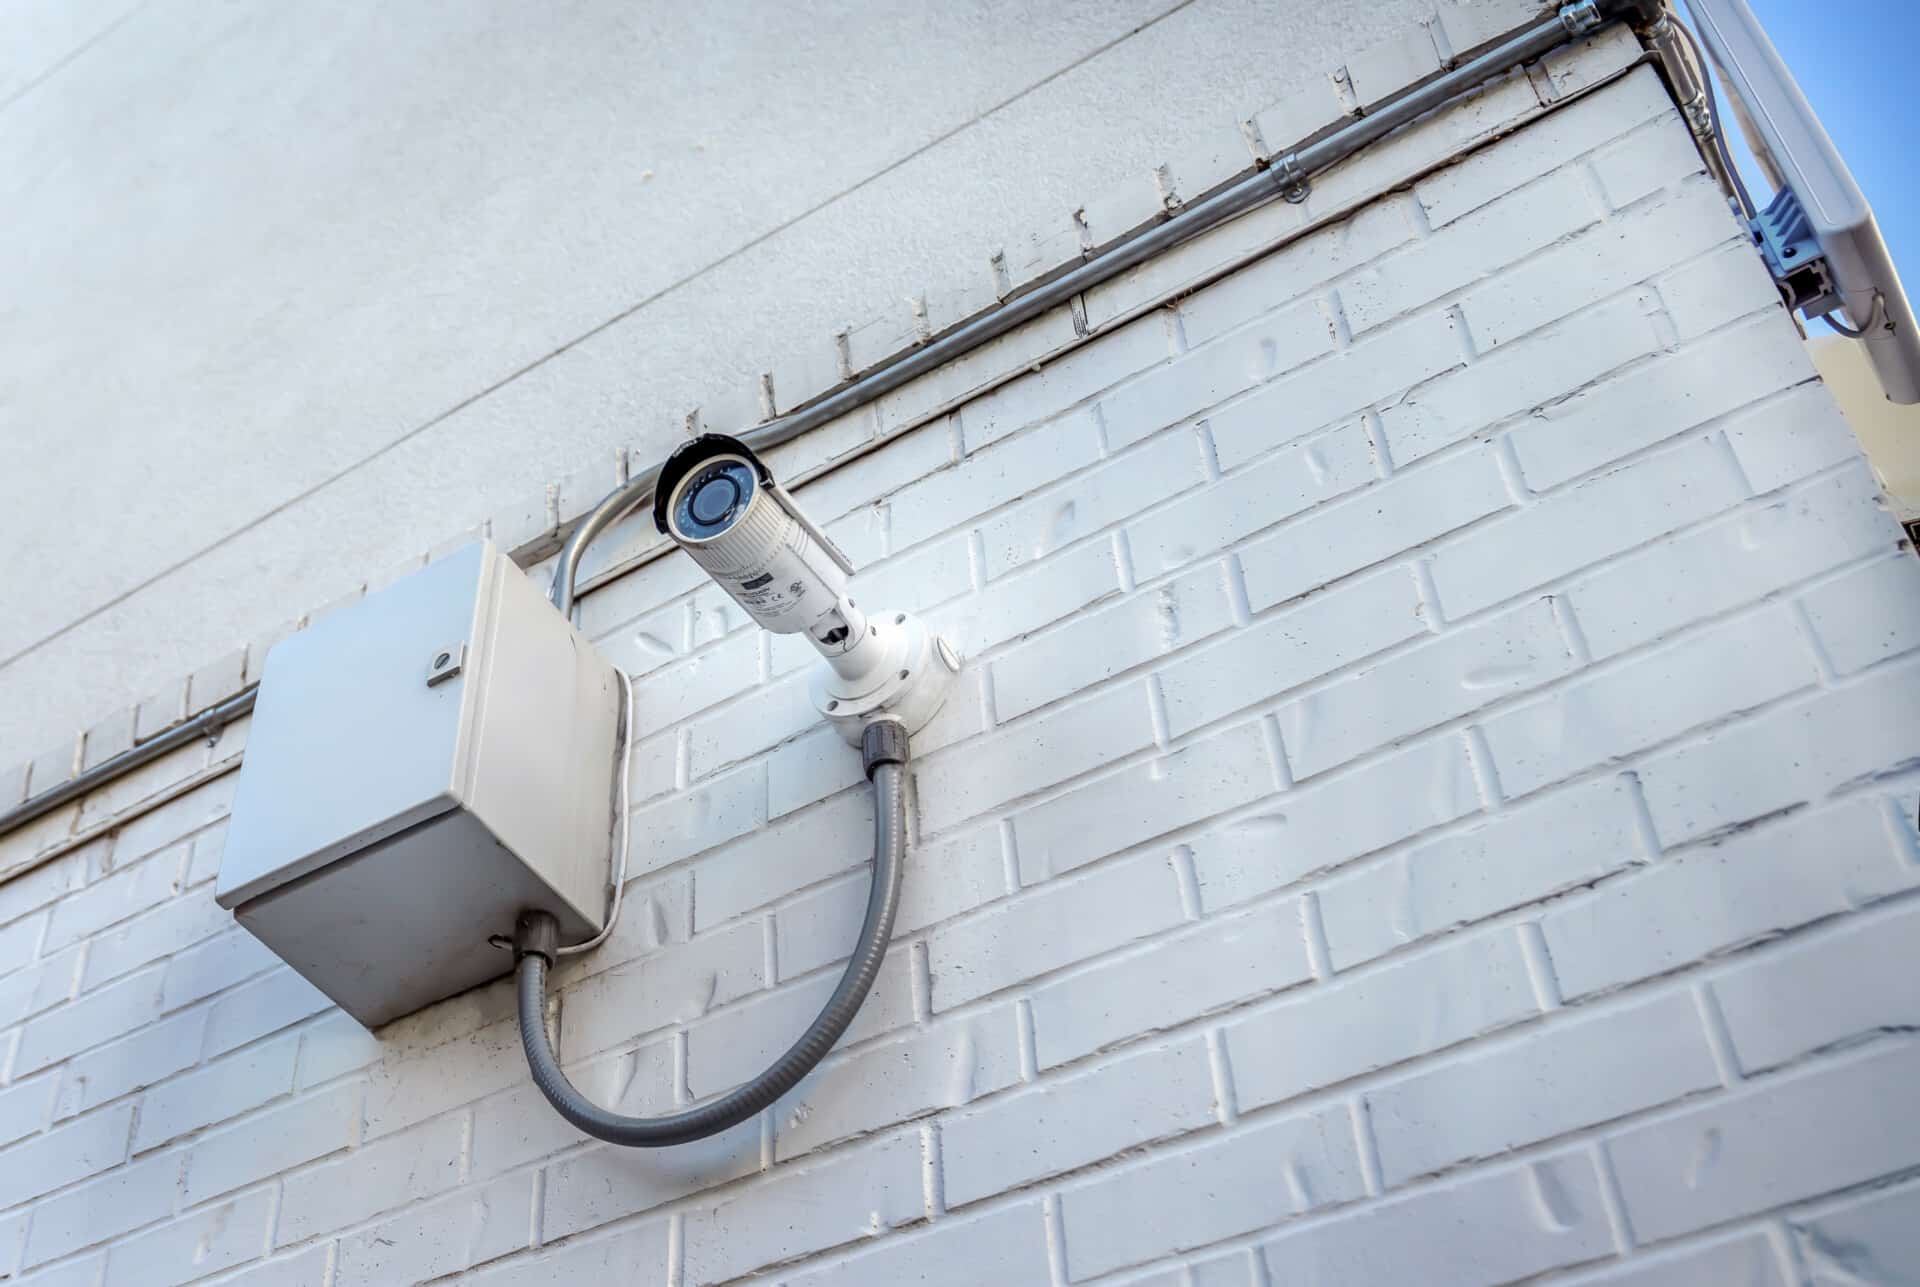 Underside view of a security camera and control box installed outside a building.